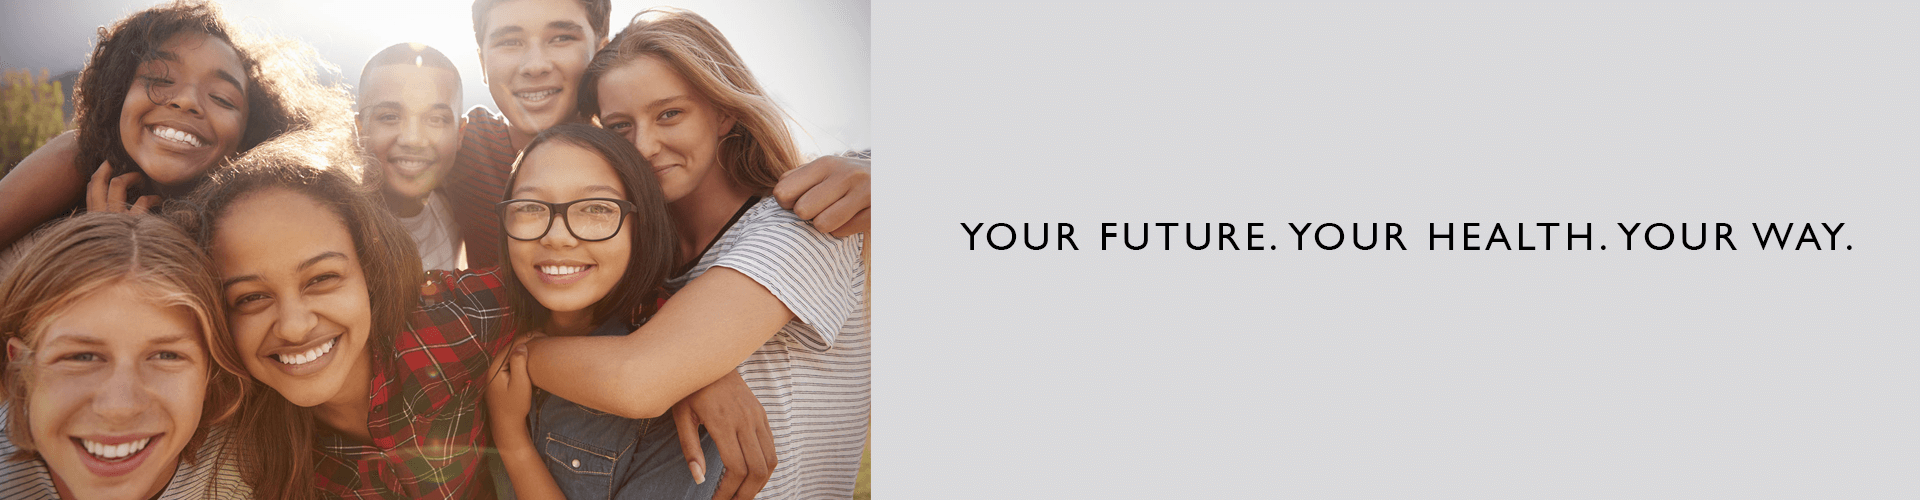 Your future. Your health. Your way.